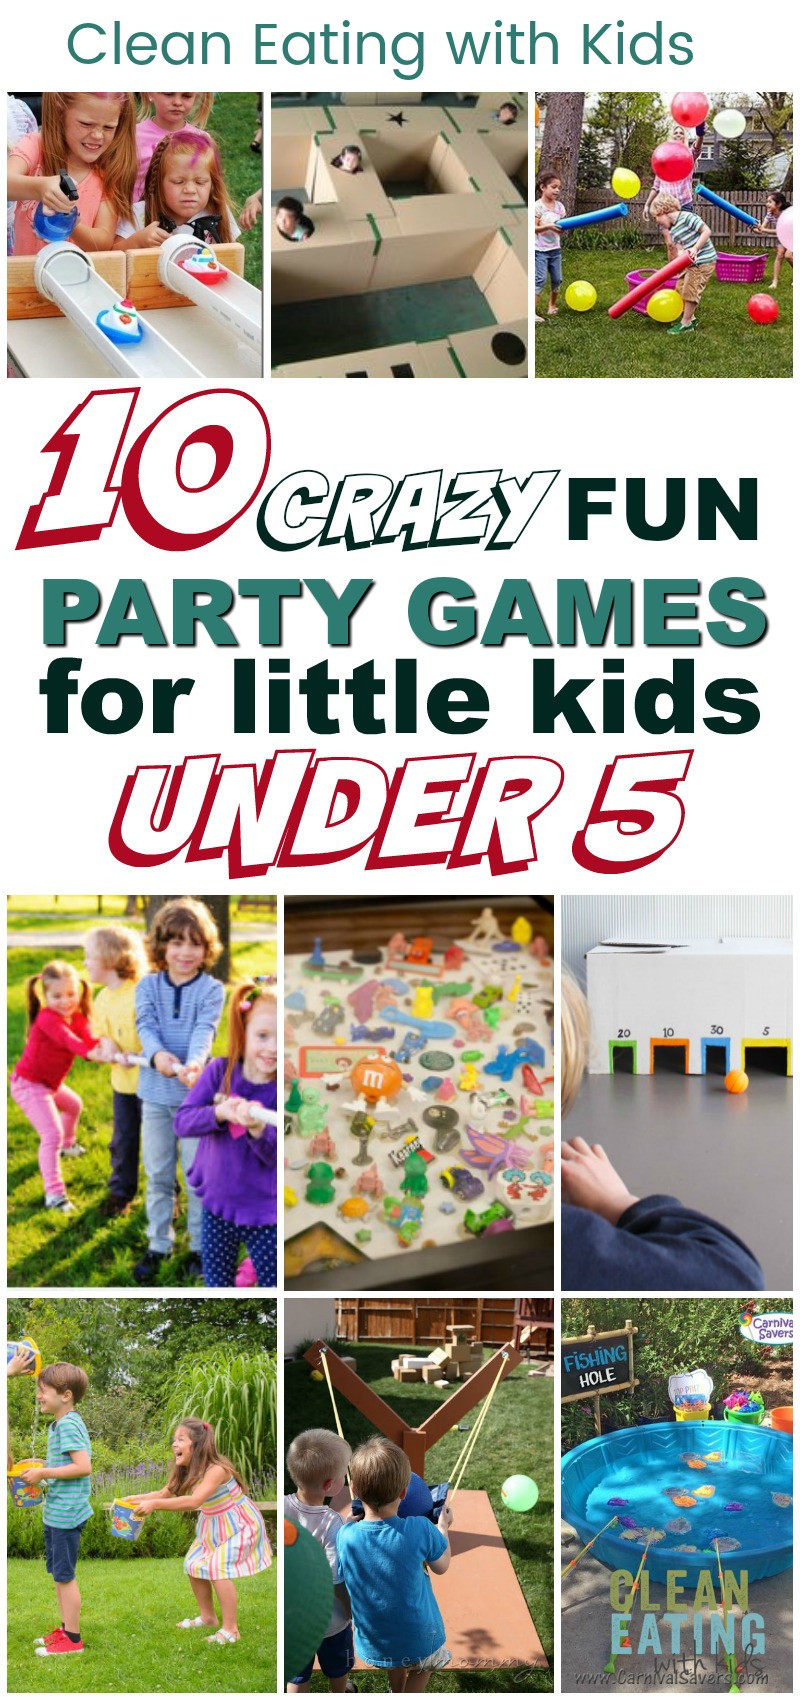 Party Games For Little Kids
 10 Fun & Super Entertaining Party Games for Little Kids